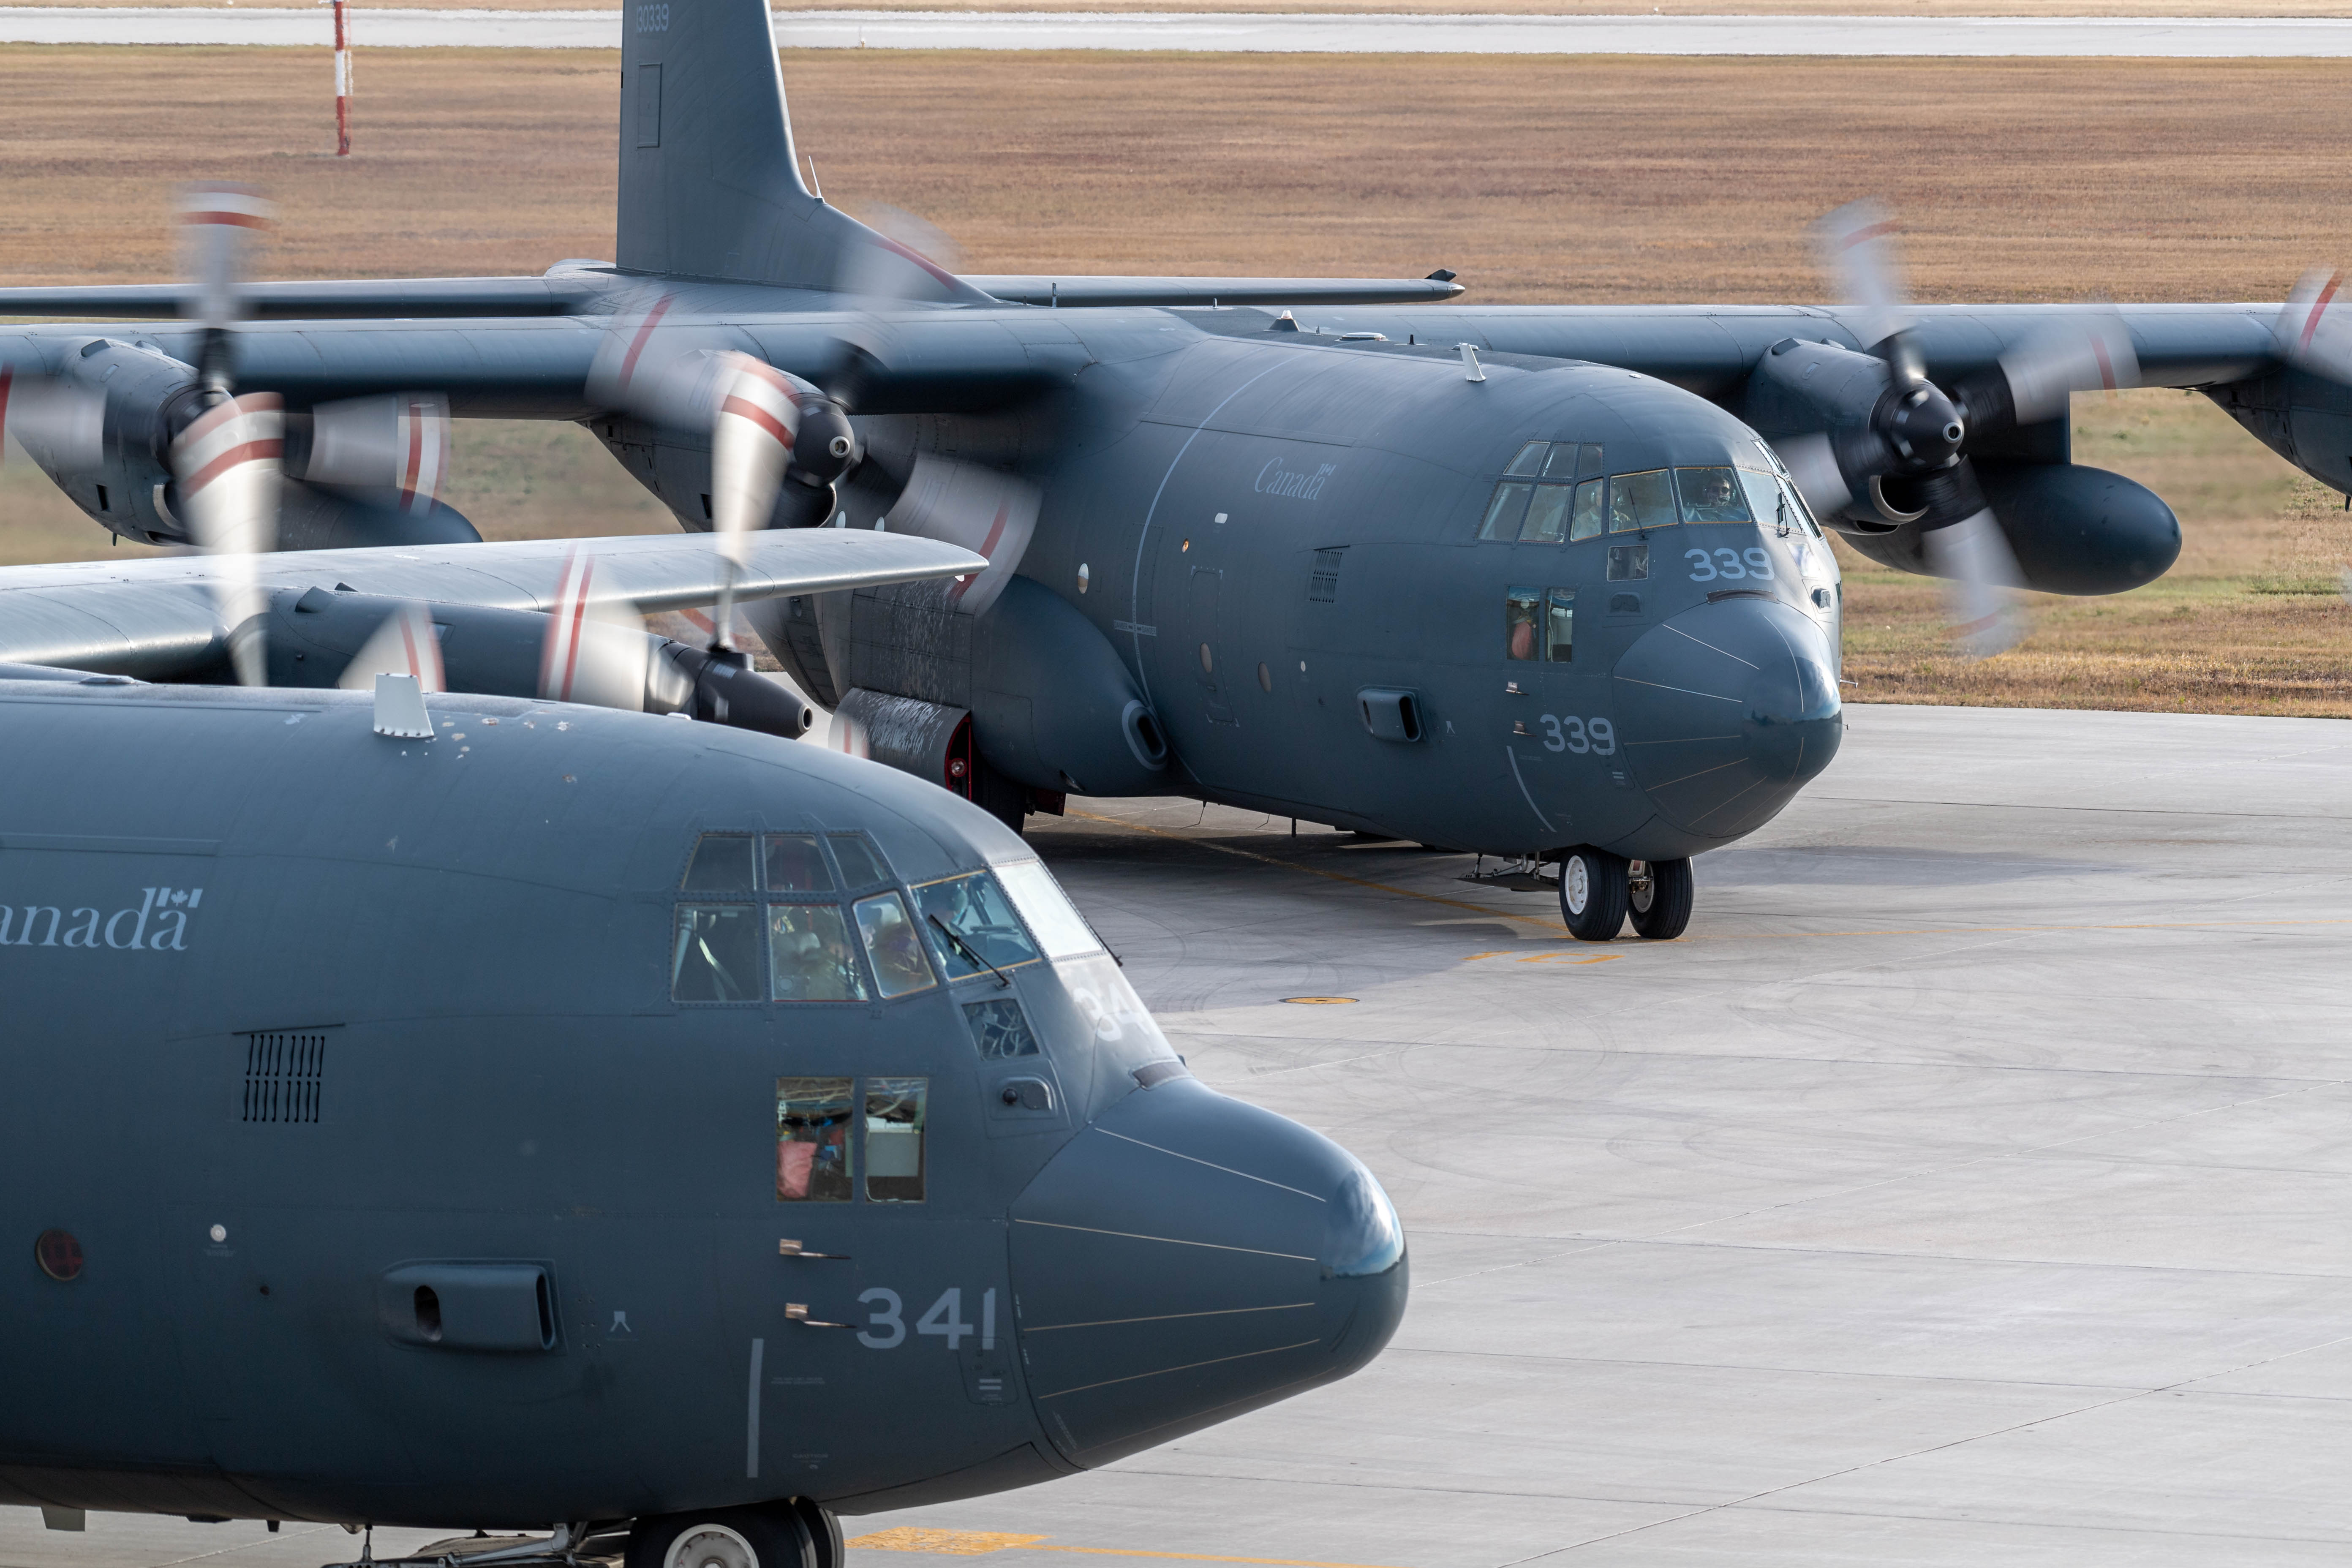 CC-130 Hercules aircraft rolling on the tarmac at 17 Wing Winnipeg, Manitoba, on October 13, 2020, before taking off to fly over Winnipeg to mark the 60th year of service of the aircraft in the Royal Canadian Air Force. PHOTO: Corporal Darryl Hepner